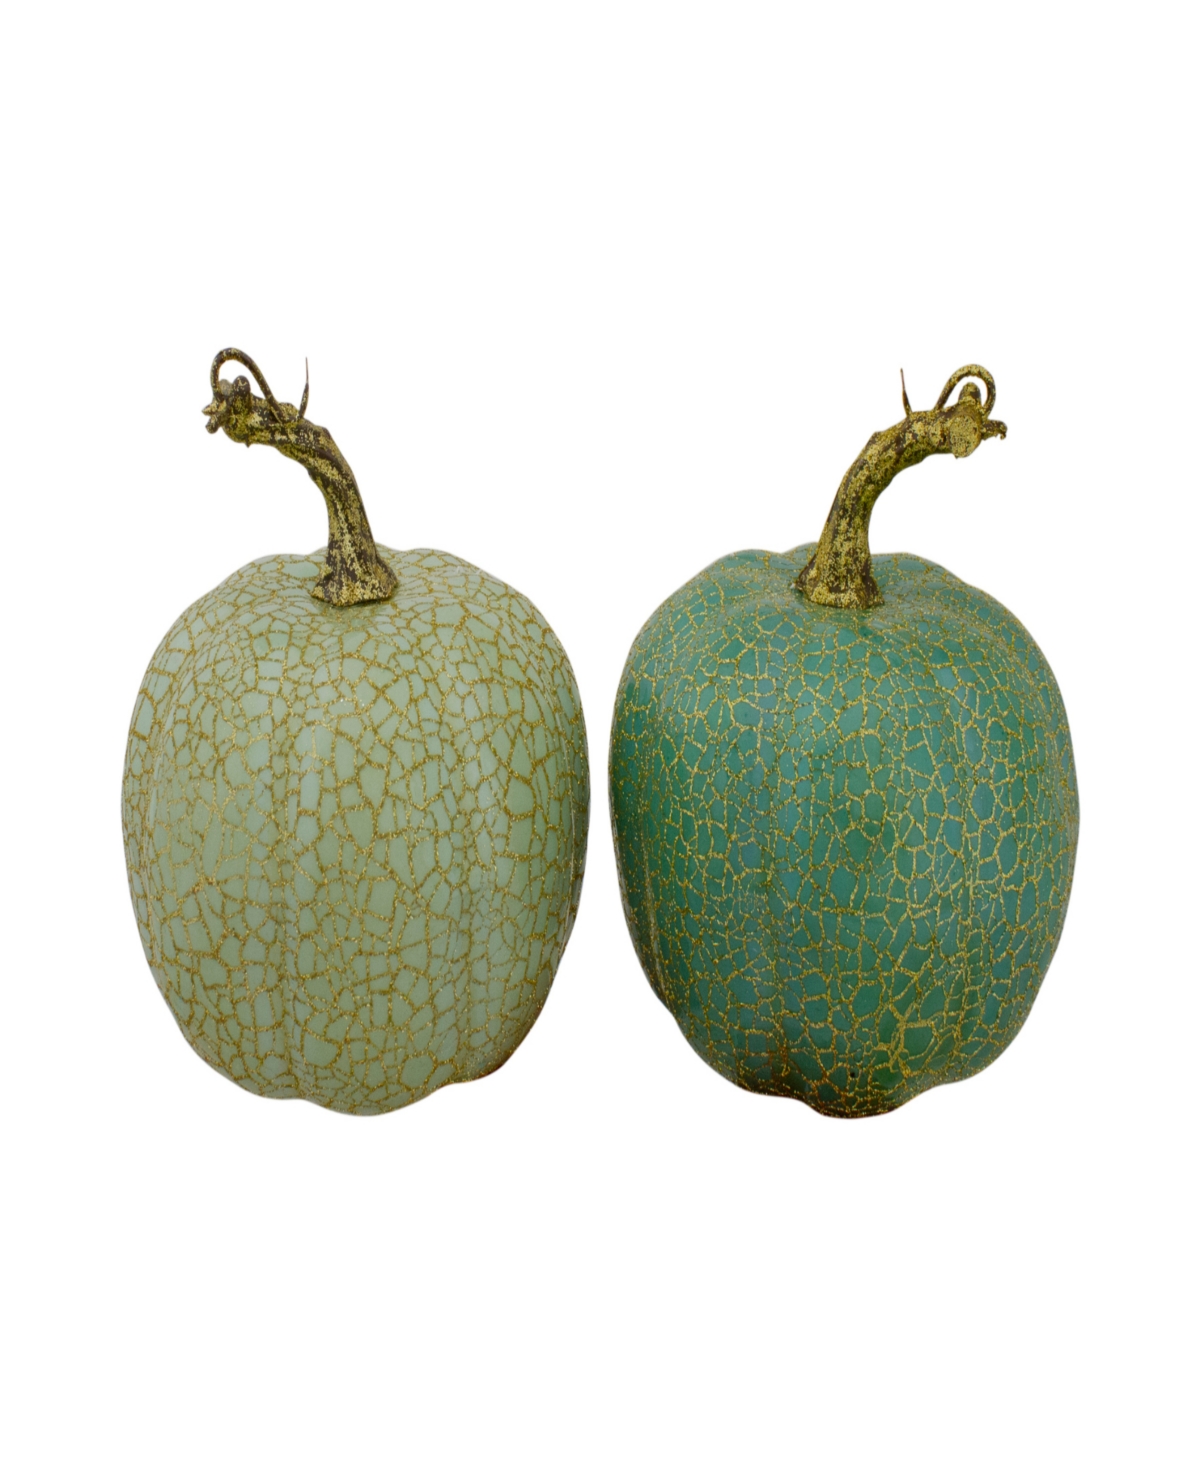 Set of 2 Green and Gold-Tone Crackle Fall Harvest Tabletop Thanksgiving Pumpkins 5" - Green